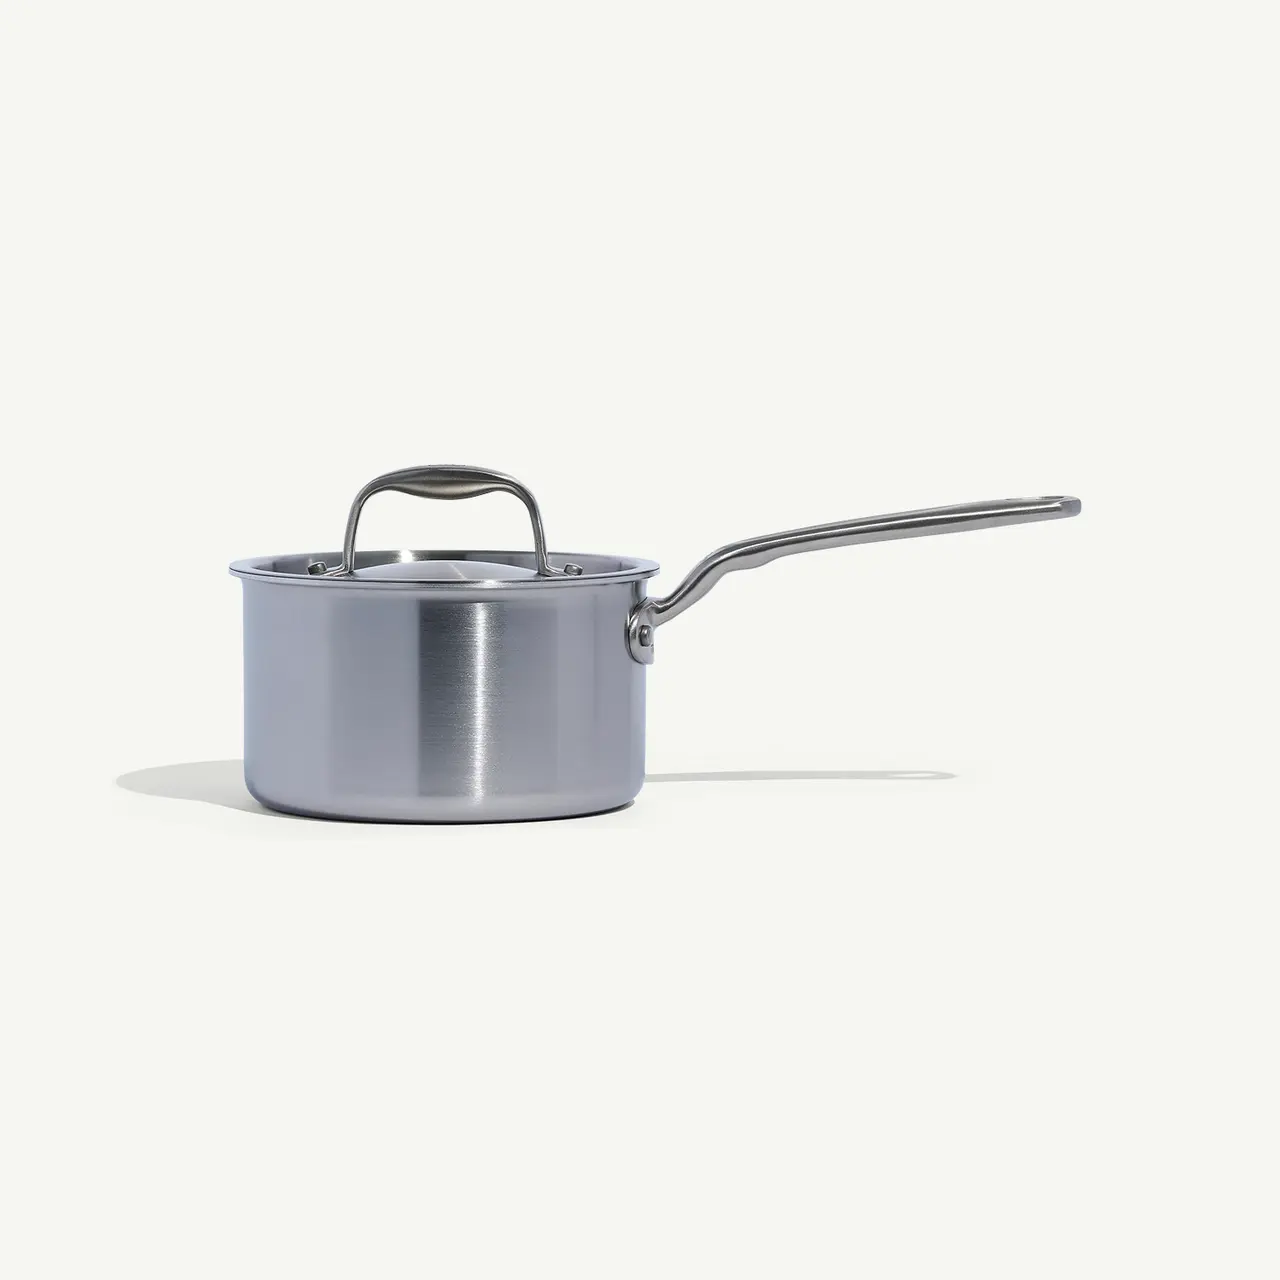 A stainless steel saucepan with a long handle is positioned on a plain background.